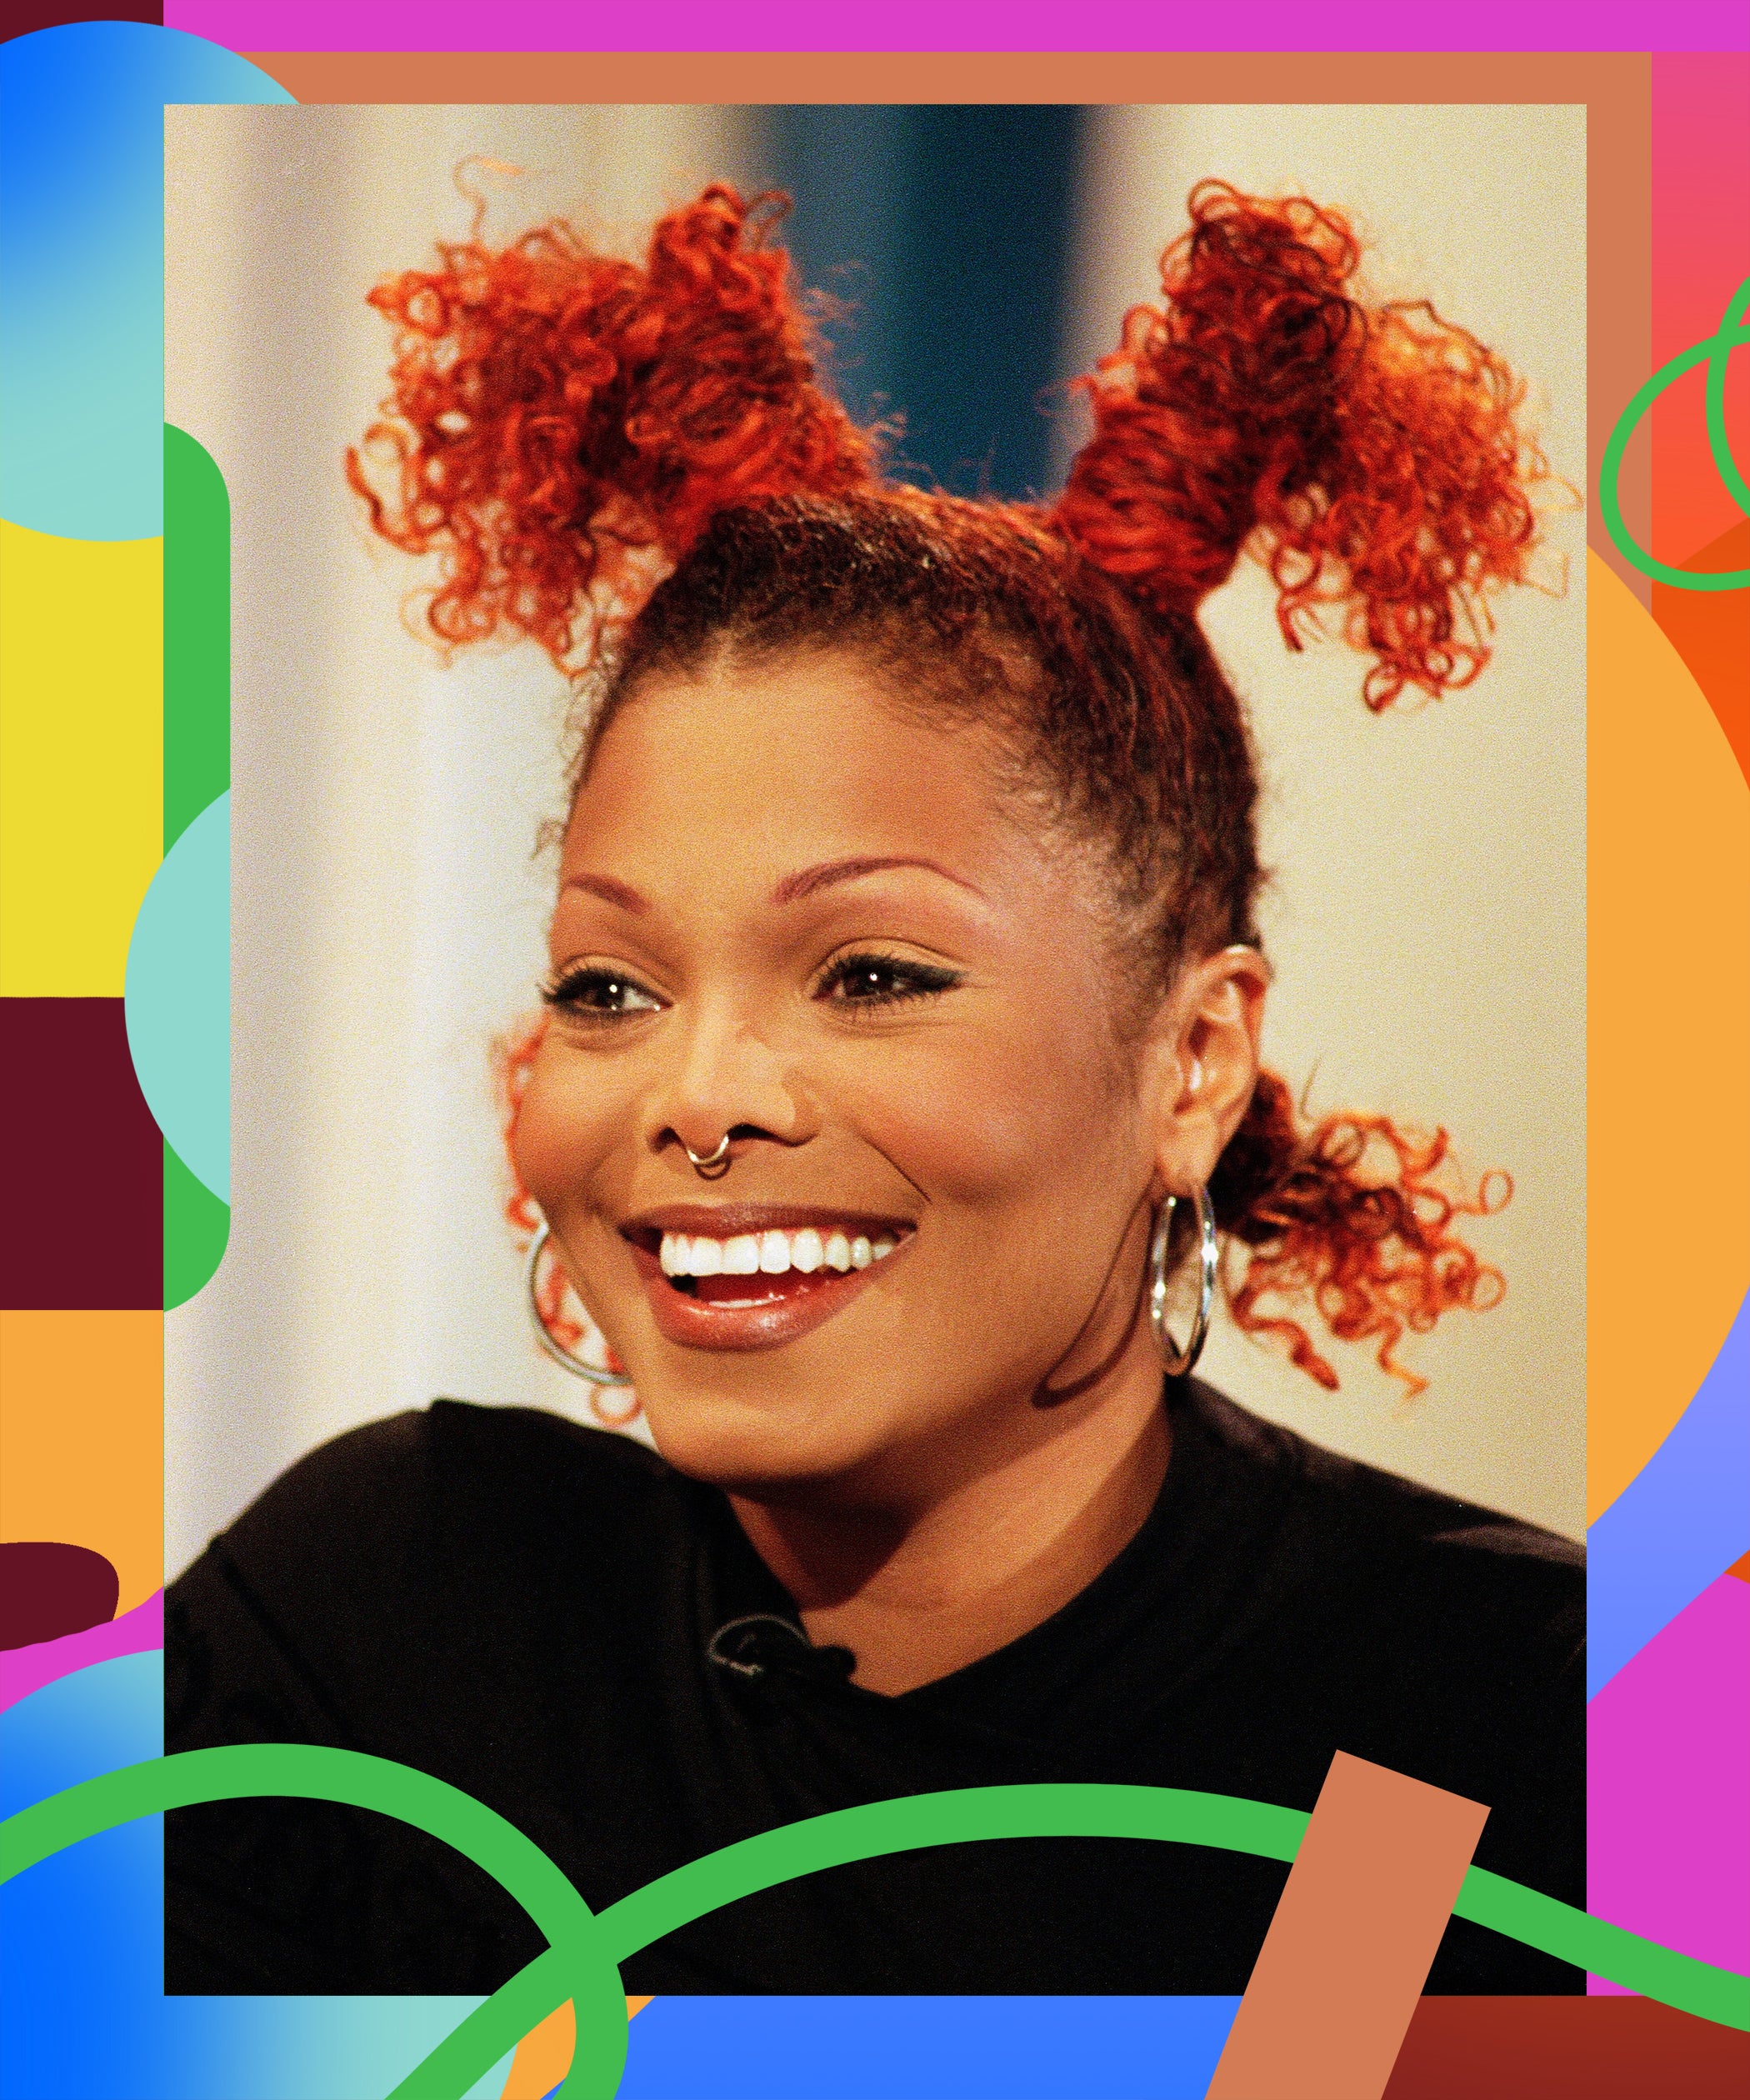 In Her New Documentary, Janet Jackson Takes Control